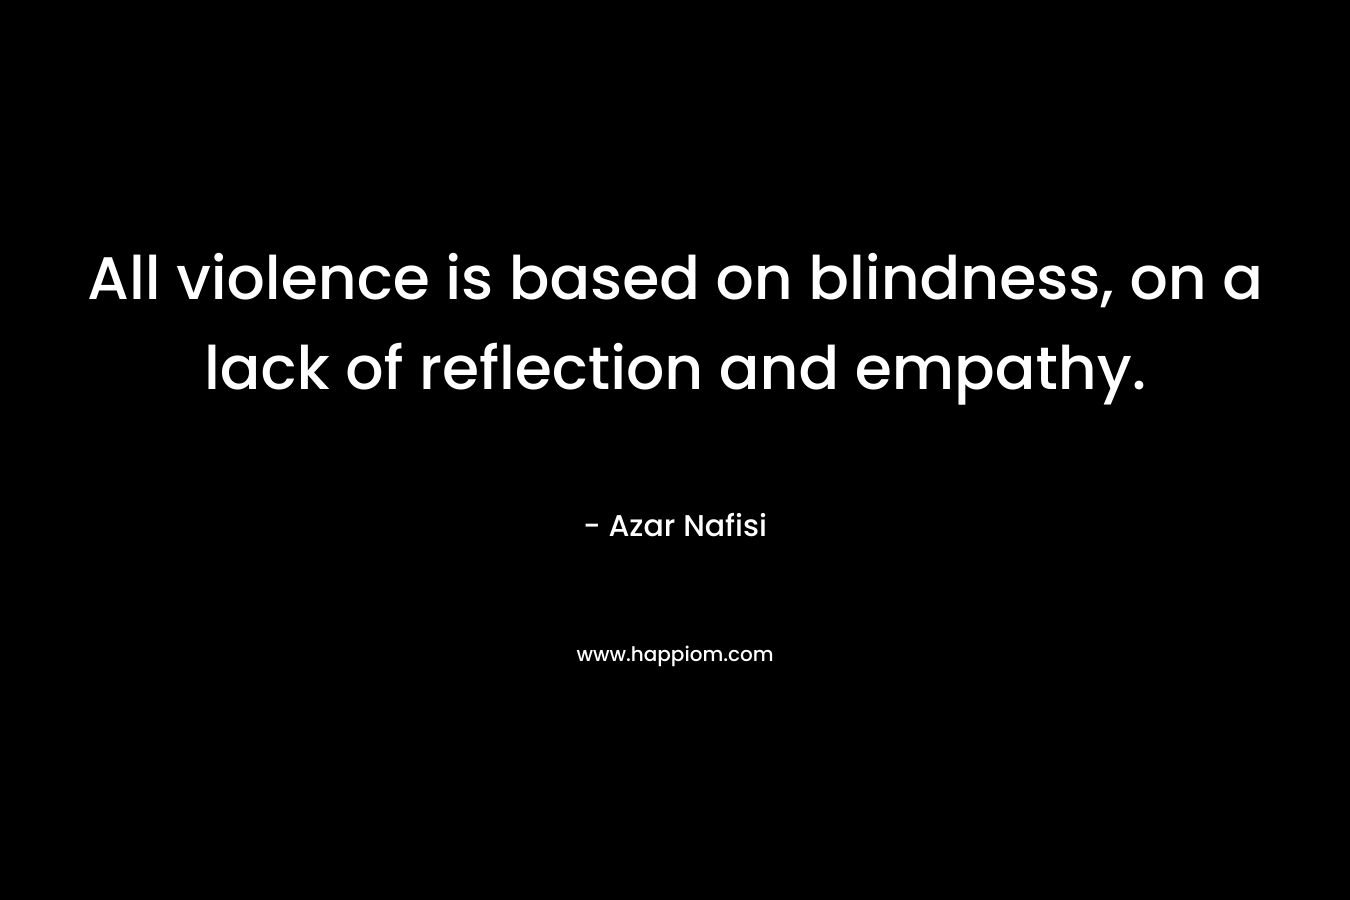 All violence is based on blindness, on a lack of reflection and empathy.